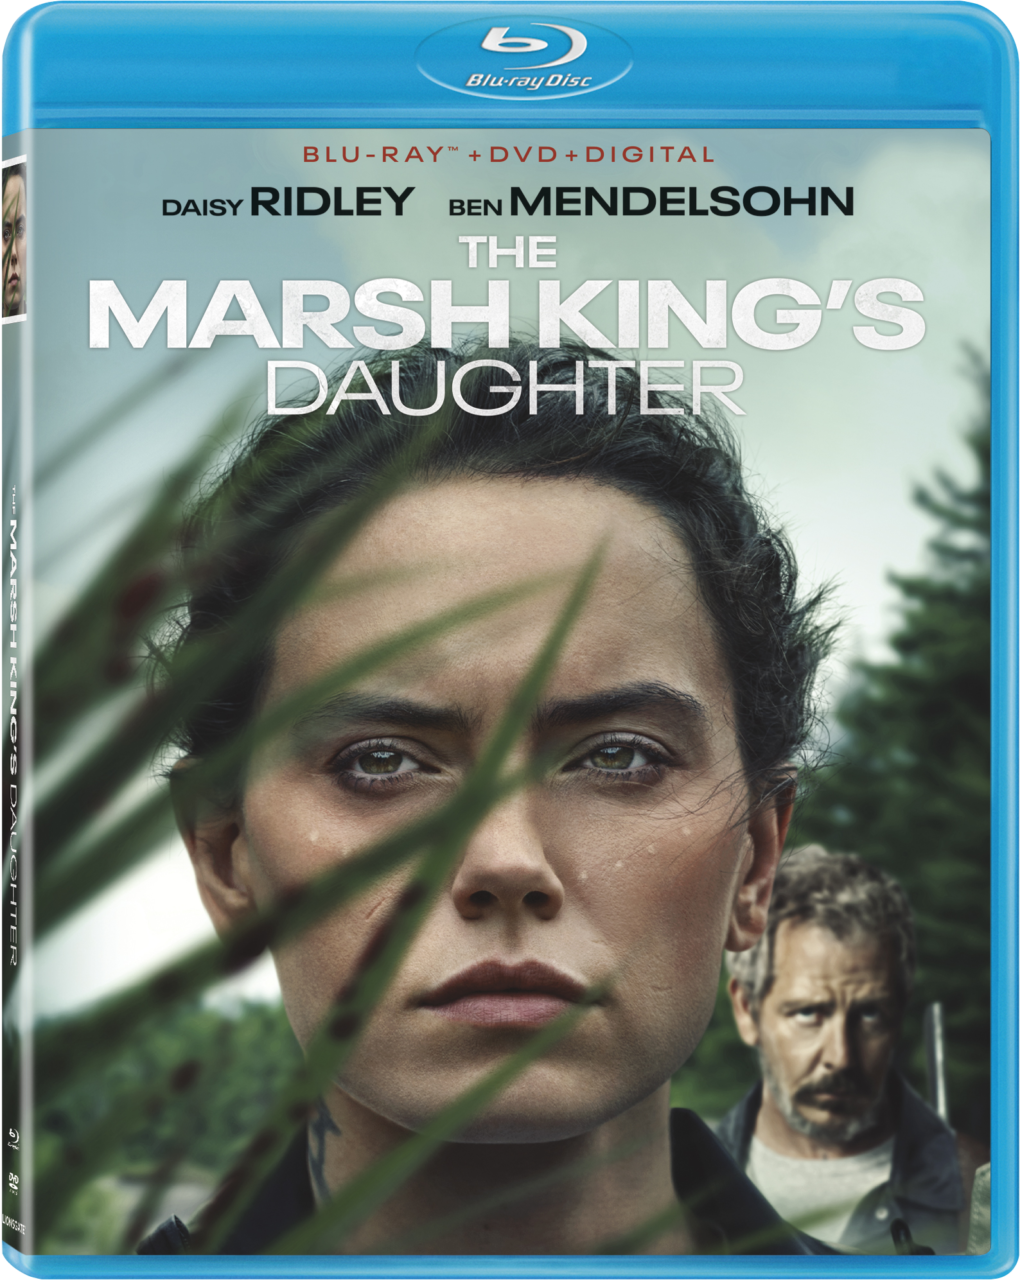 The Marsh King's Daughter Blu-Ray Combo Pack cover (Lionsgate)